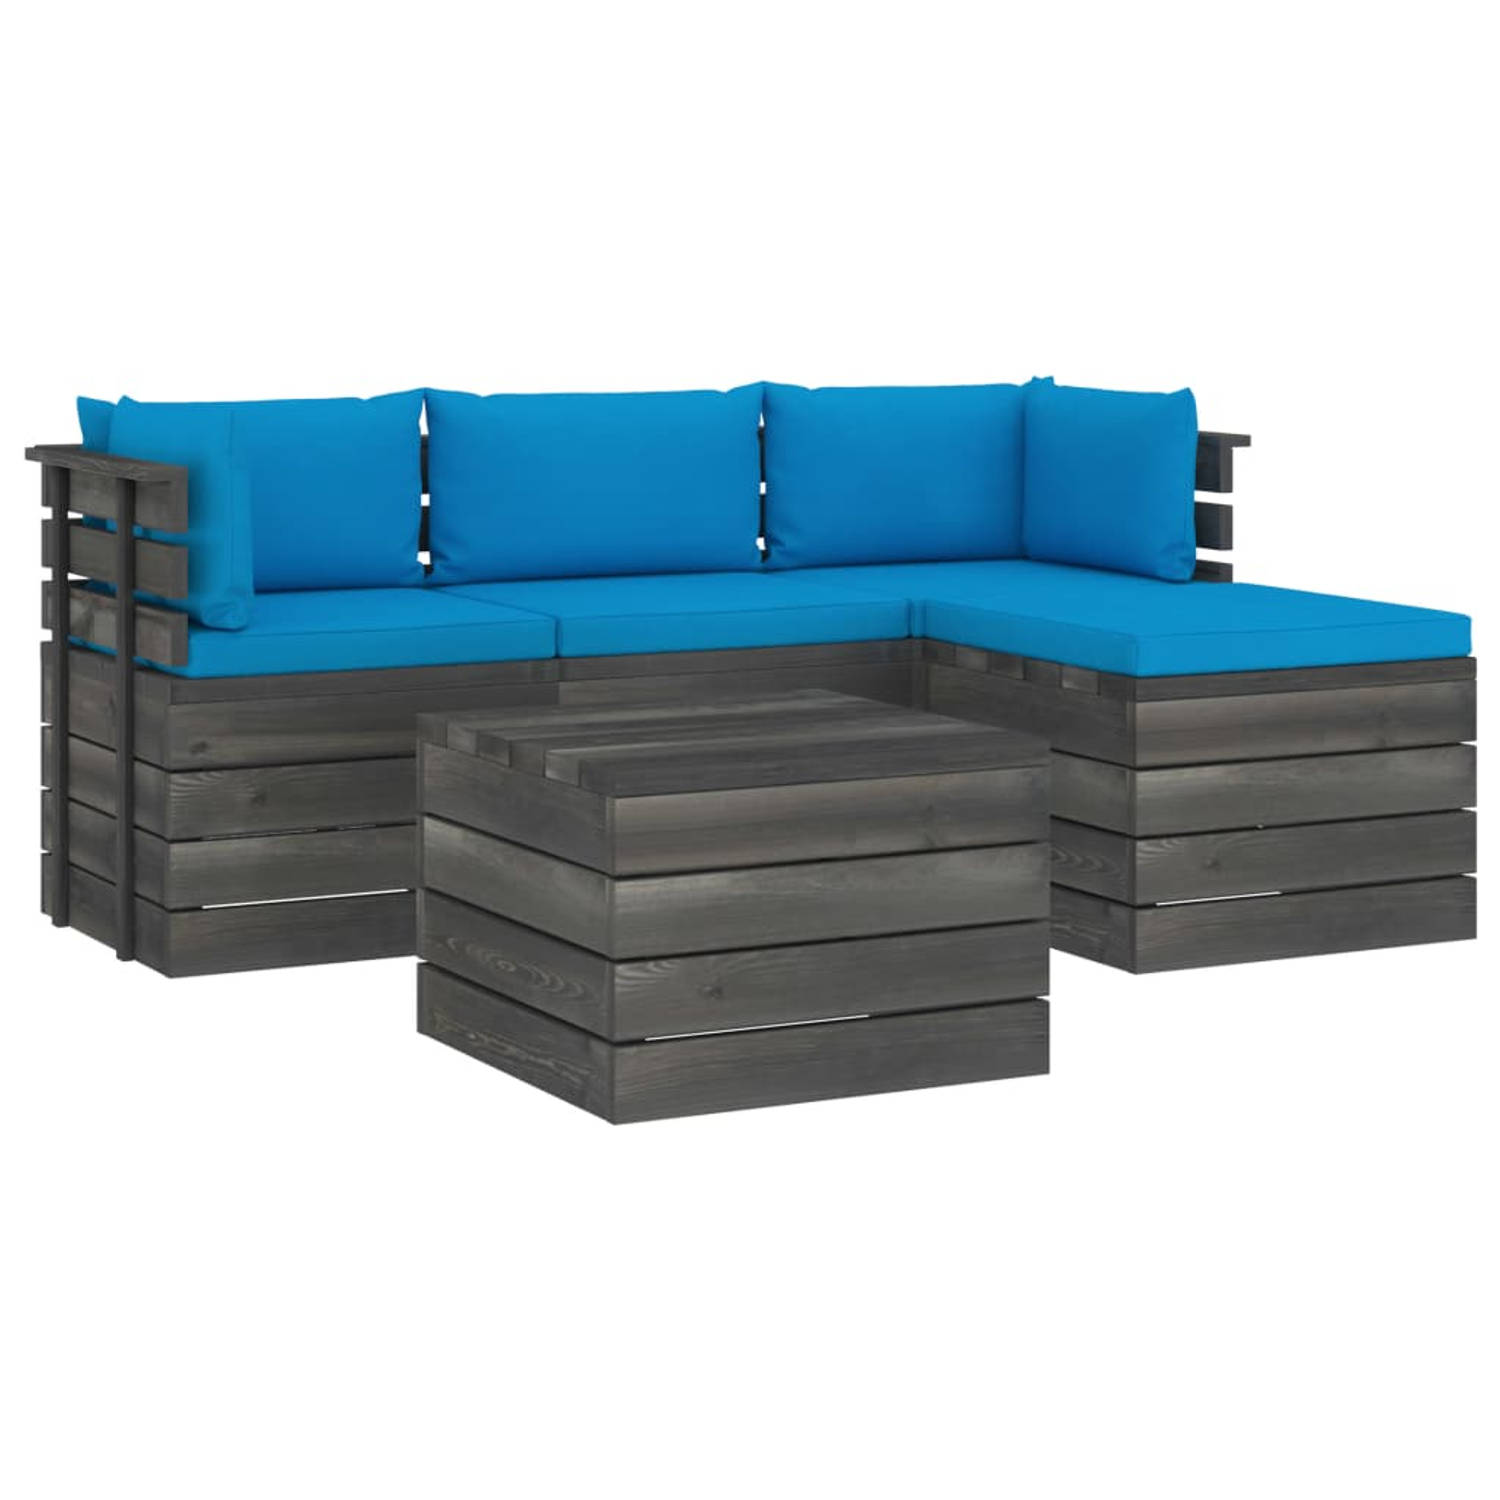 The Living Store Loungeset Pallet - Grenenhout - Tuinmeubelset - 60x65x71.5 cm - Lichtblauw